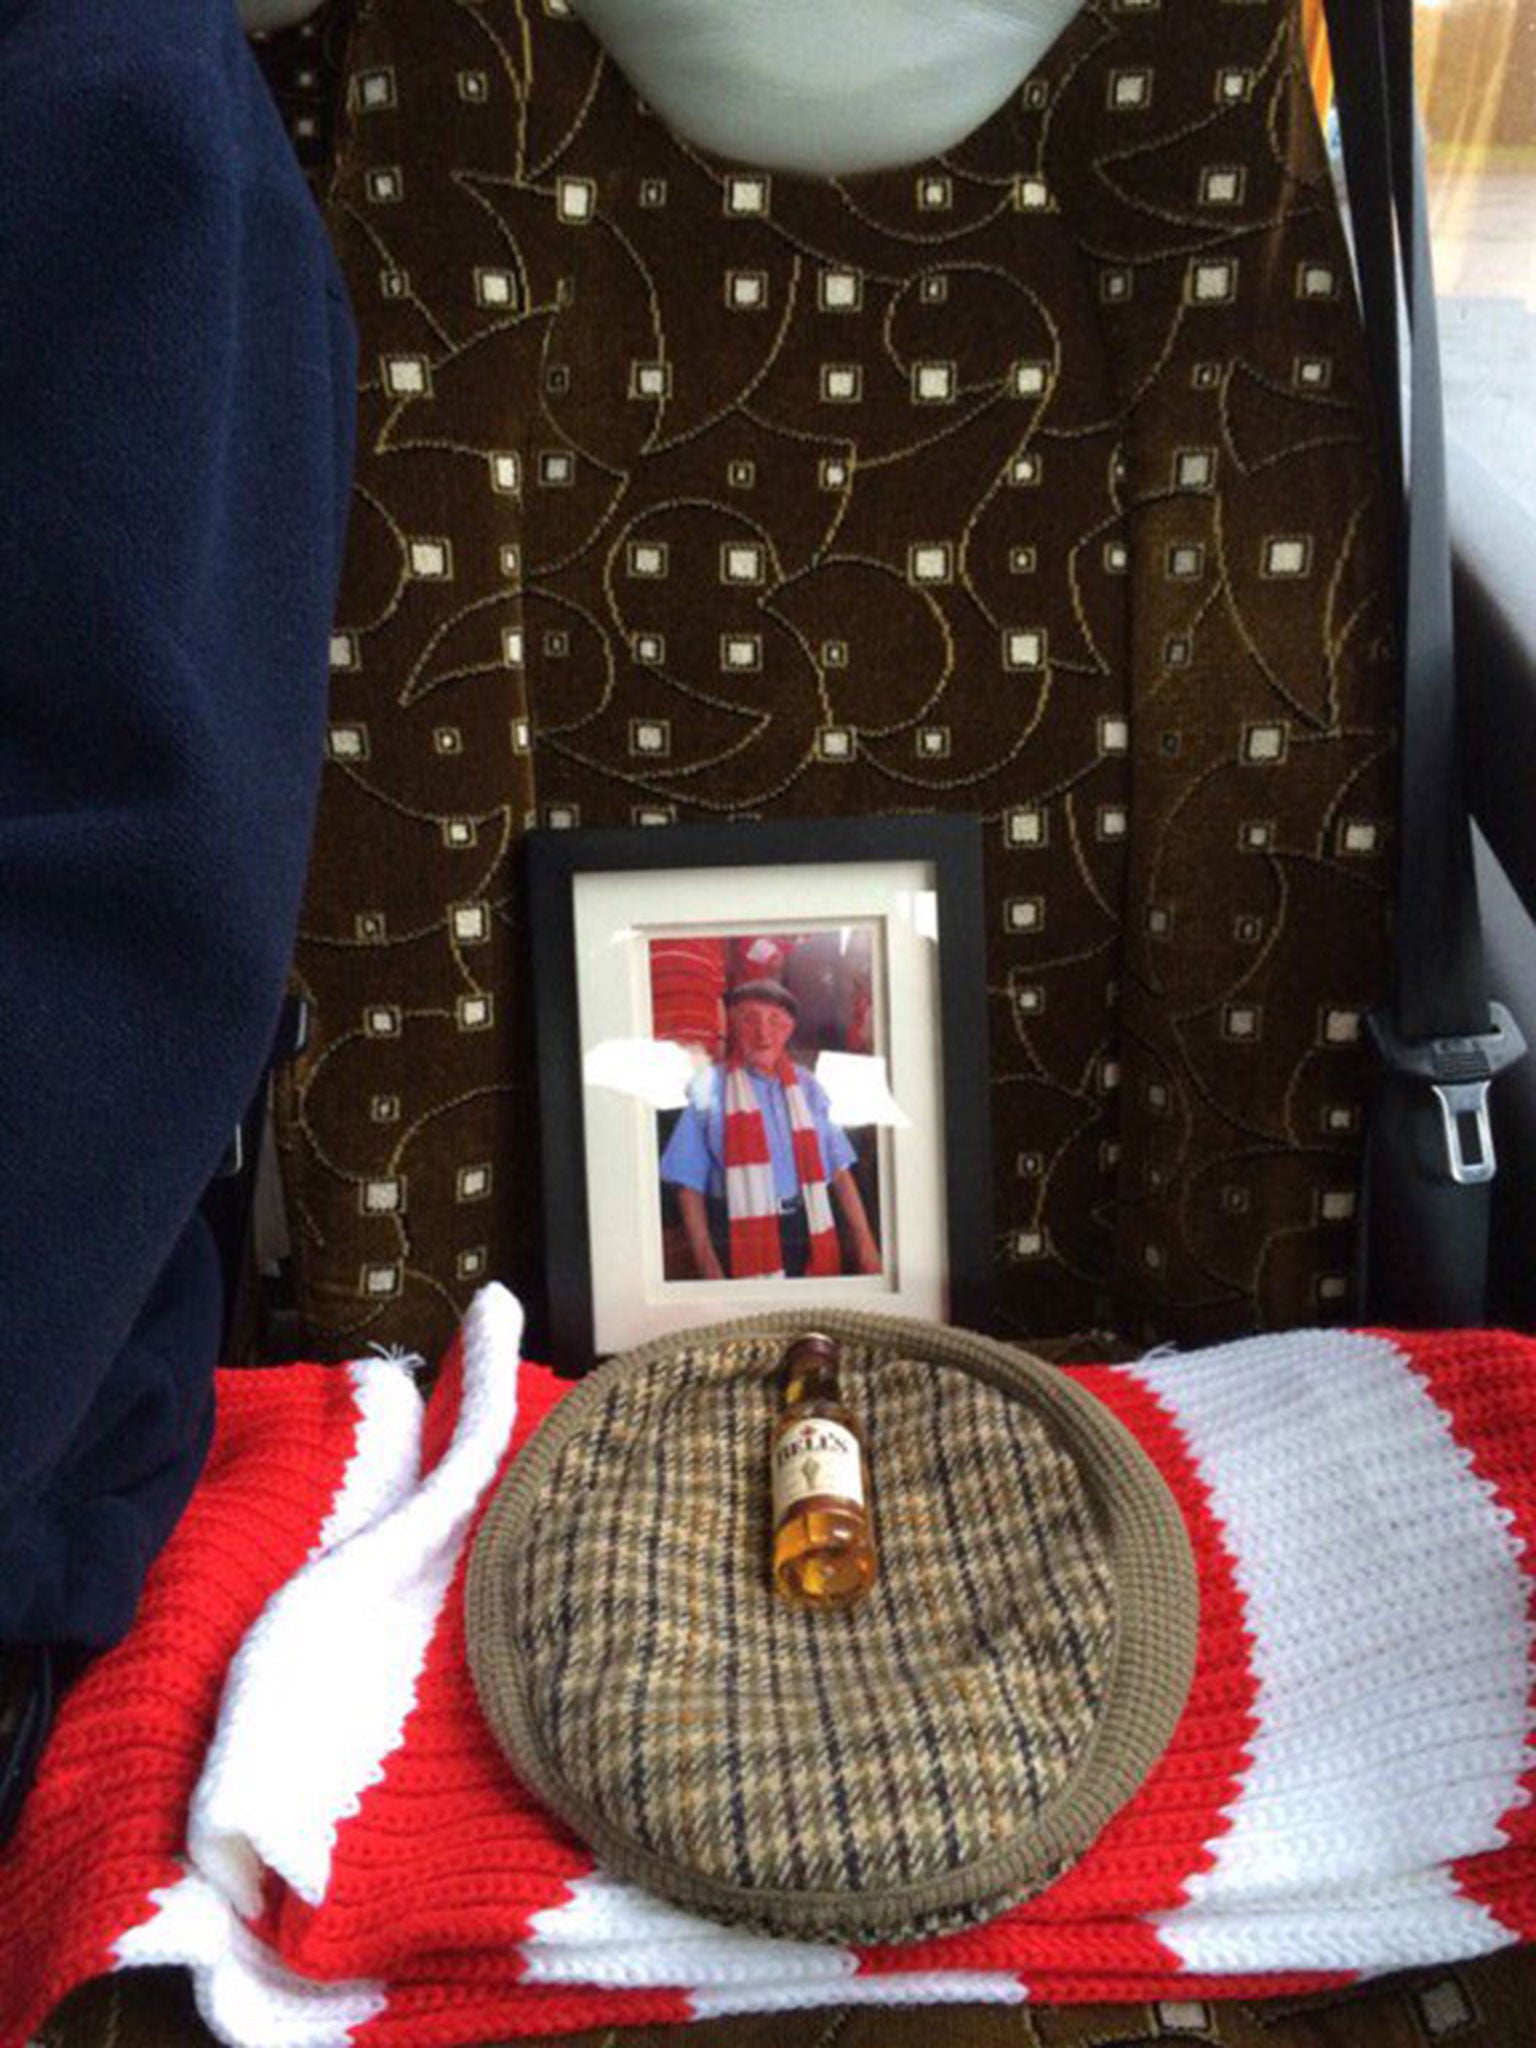 A tribute to Arsenal fan Ernie Crouch